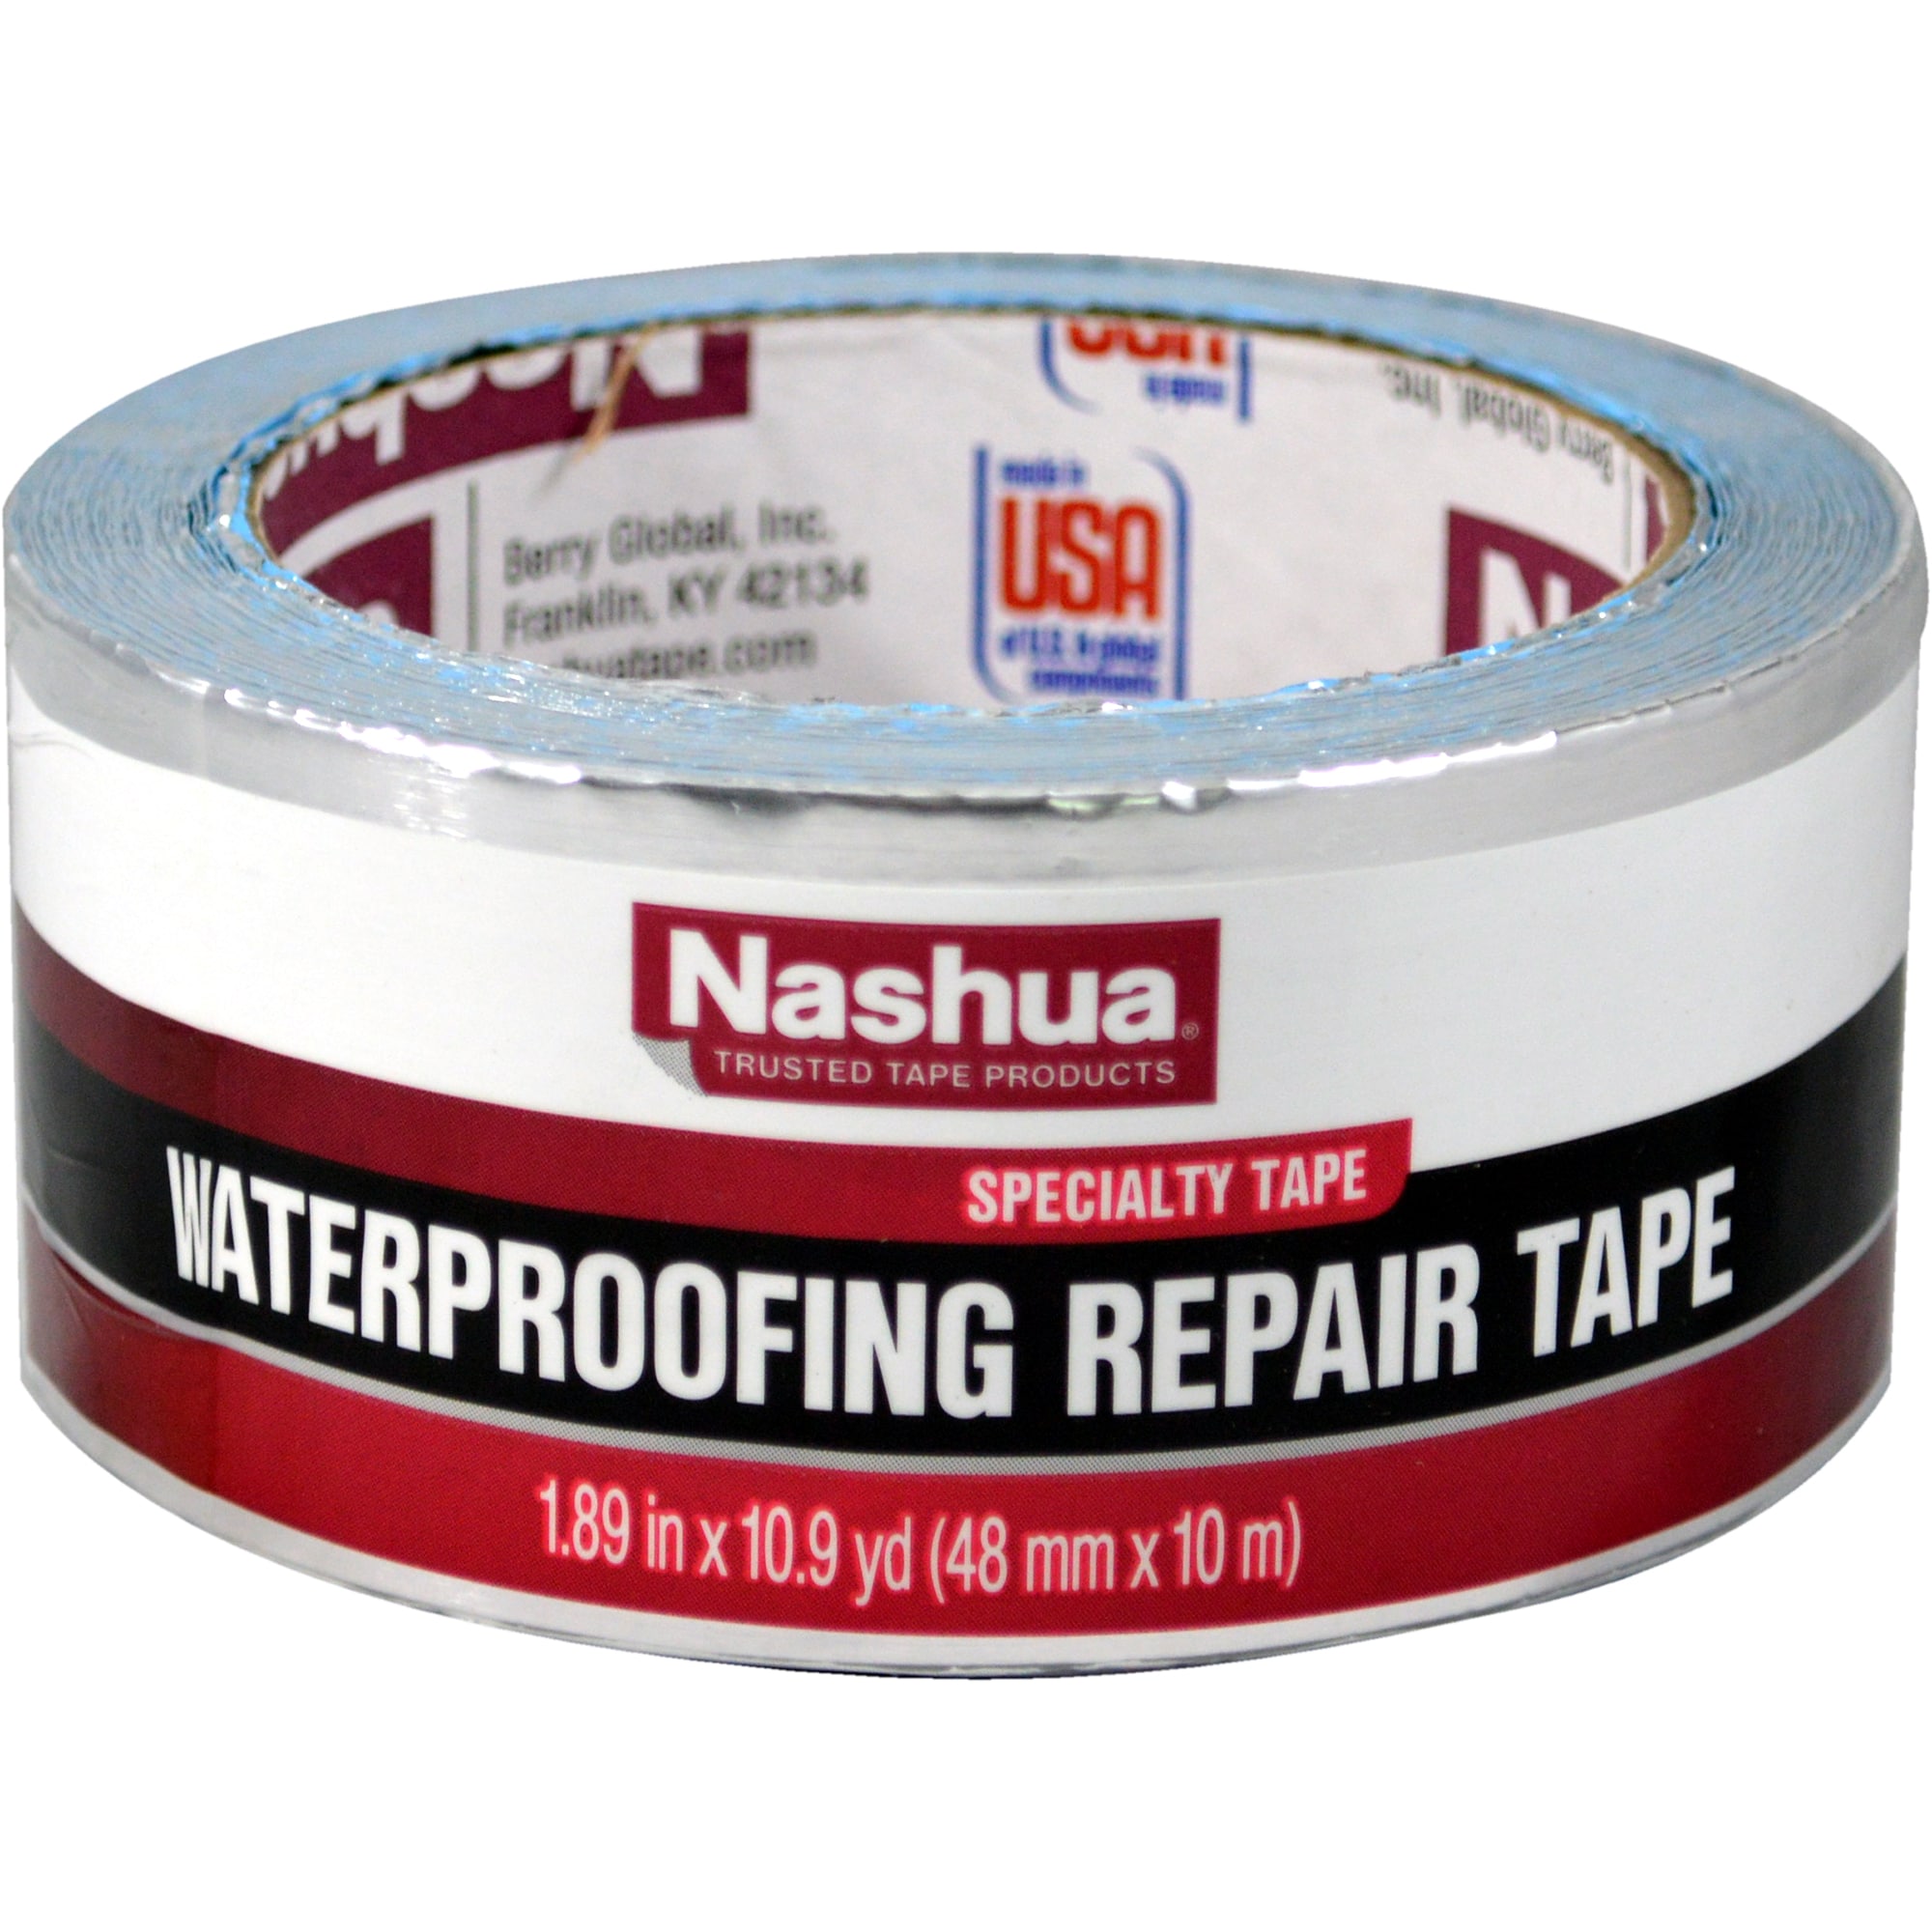 Nashua Tape 2 1/2 x 60 Yards 4.8 Mil UL Foil Tape with Acrylic Adhesive  1087630